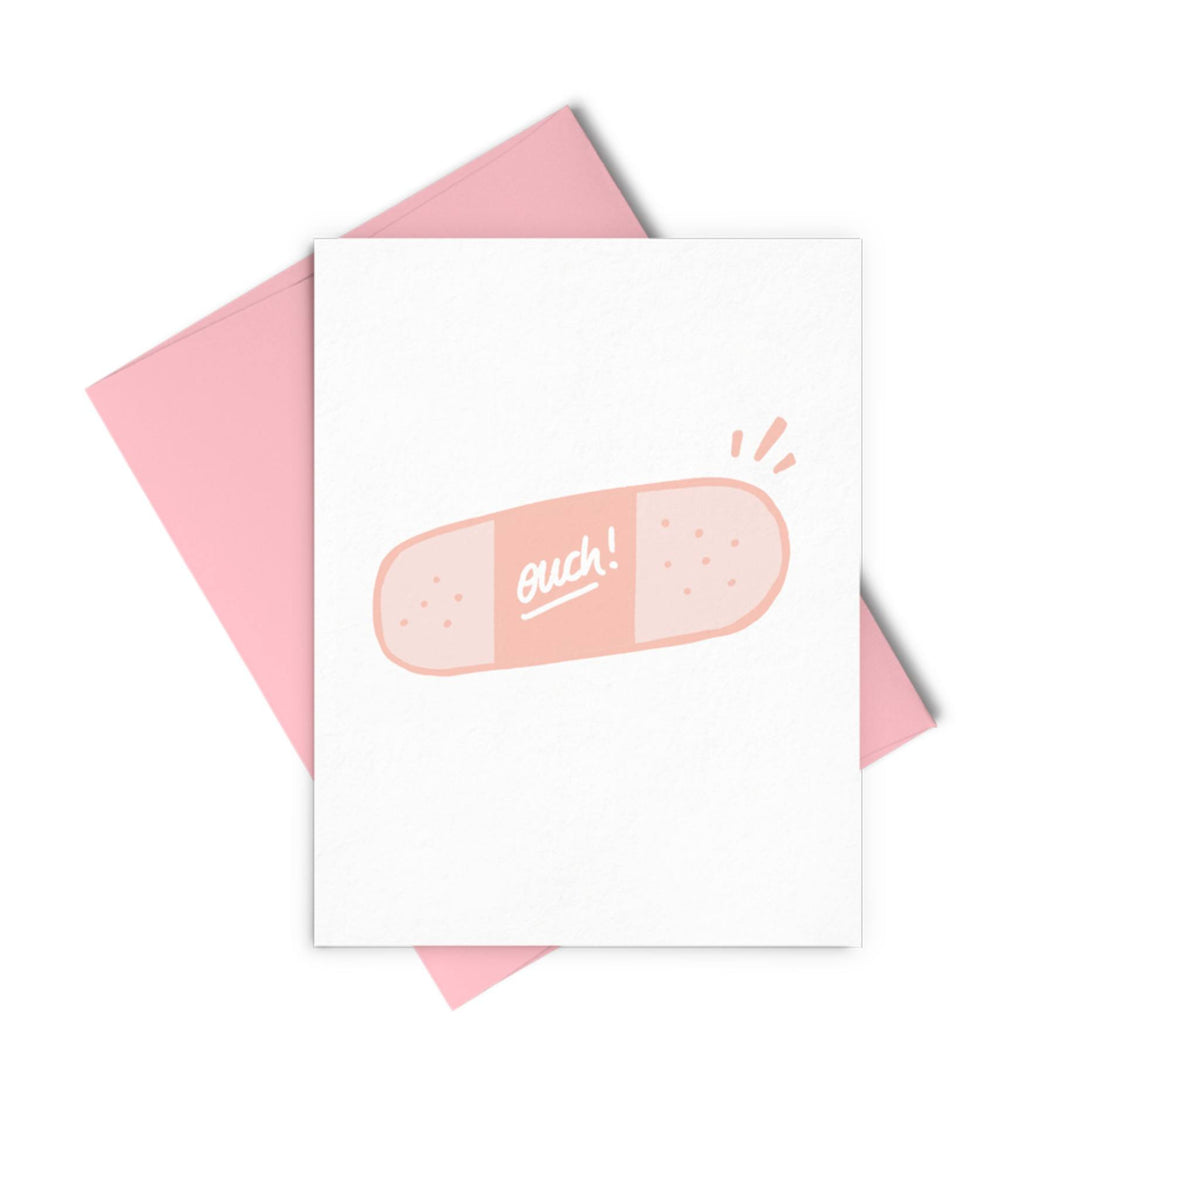 Ouch Bandaid Greeting Card